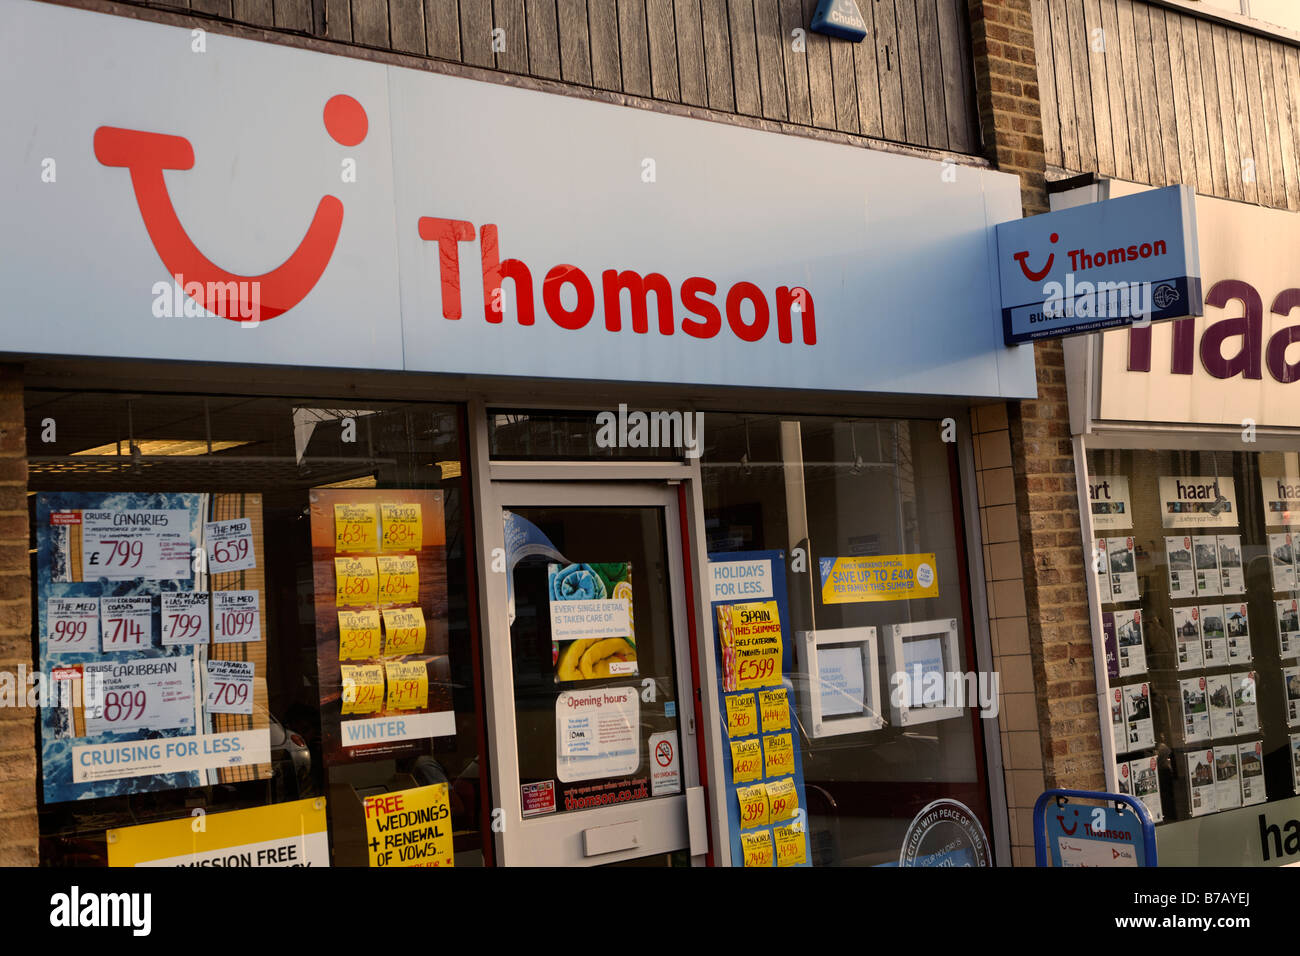 Thomson travel agents High street shops and shopping January 2009 Stock Photo